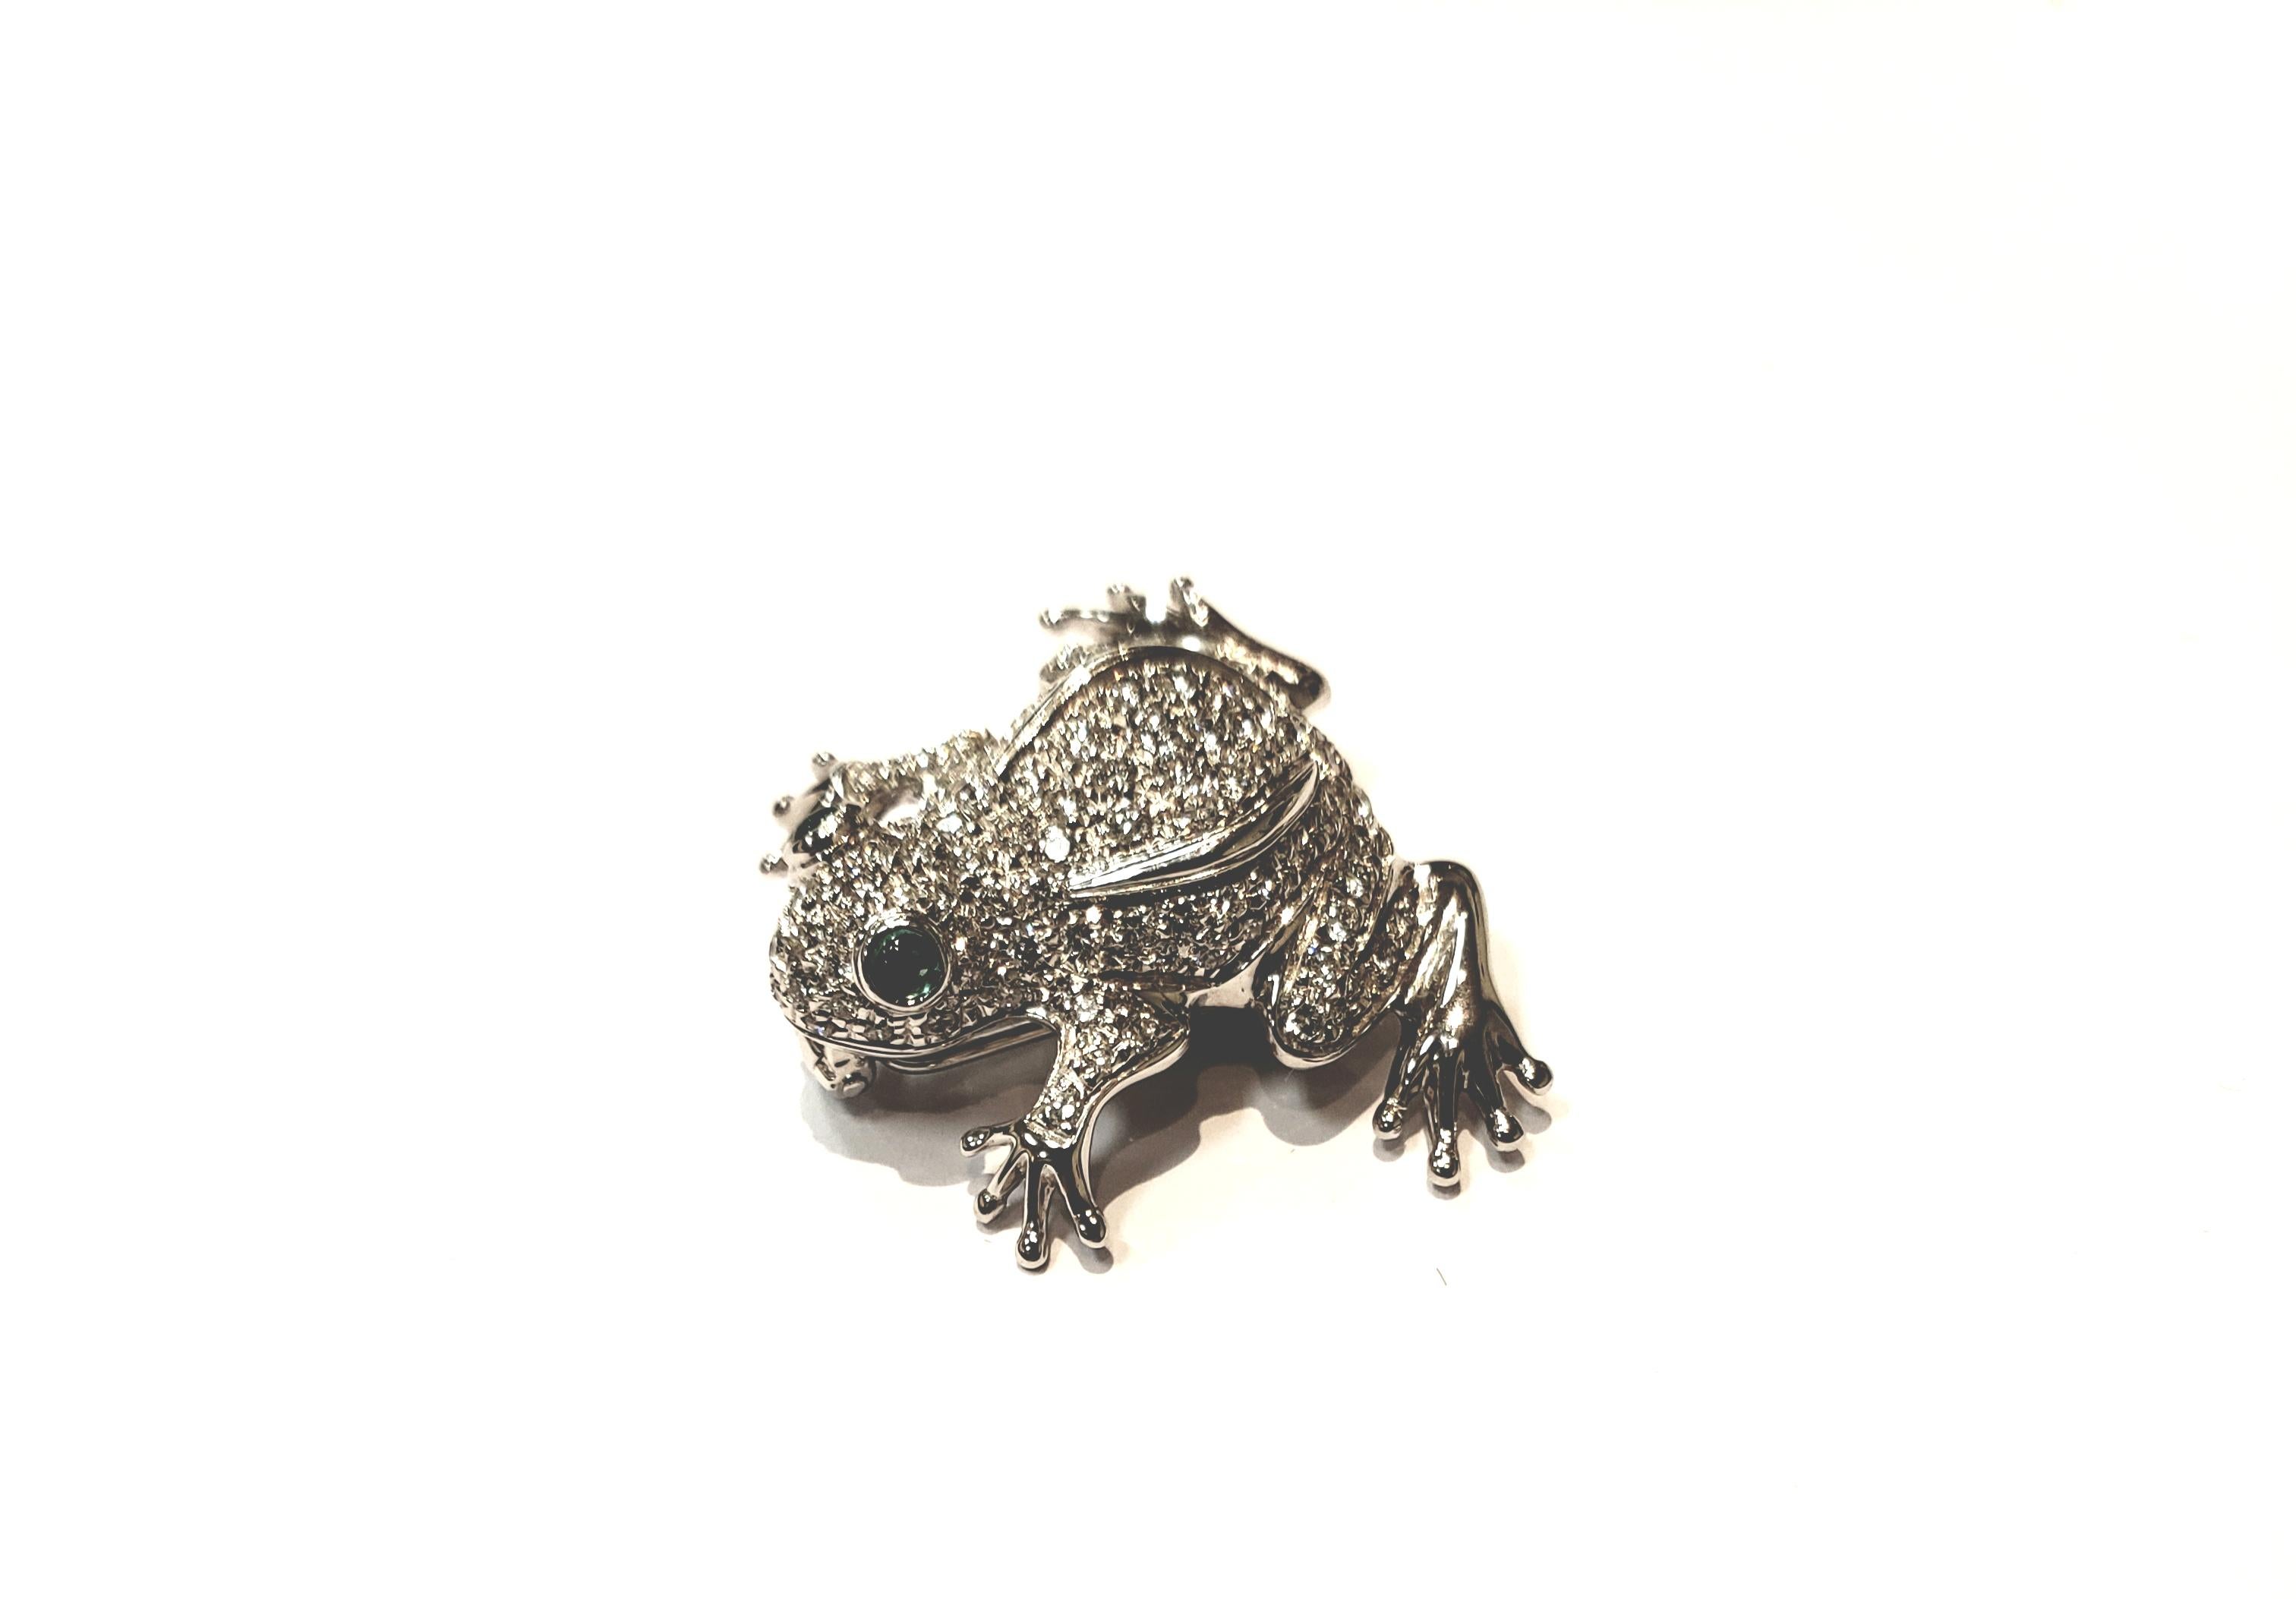 Round Cut 18 Karat White Gold and Diamond Frog Pin with Emerald Eyes by Aldo Garavelli For Sale